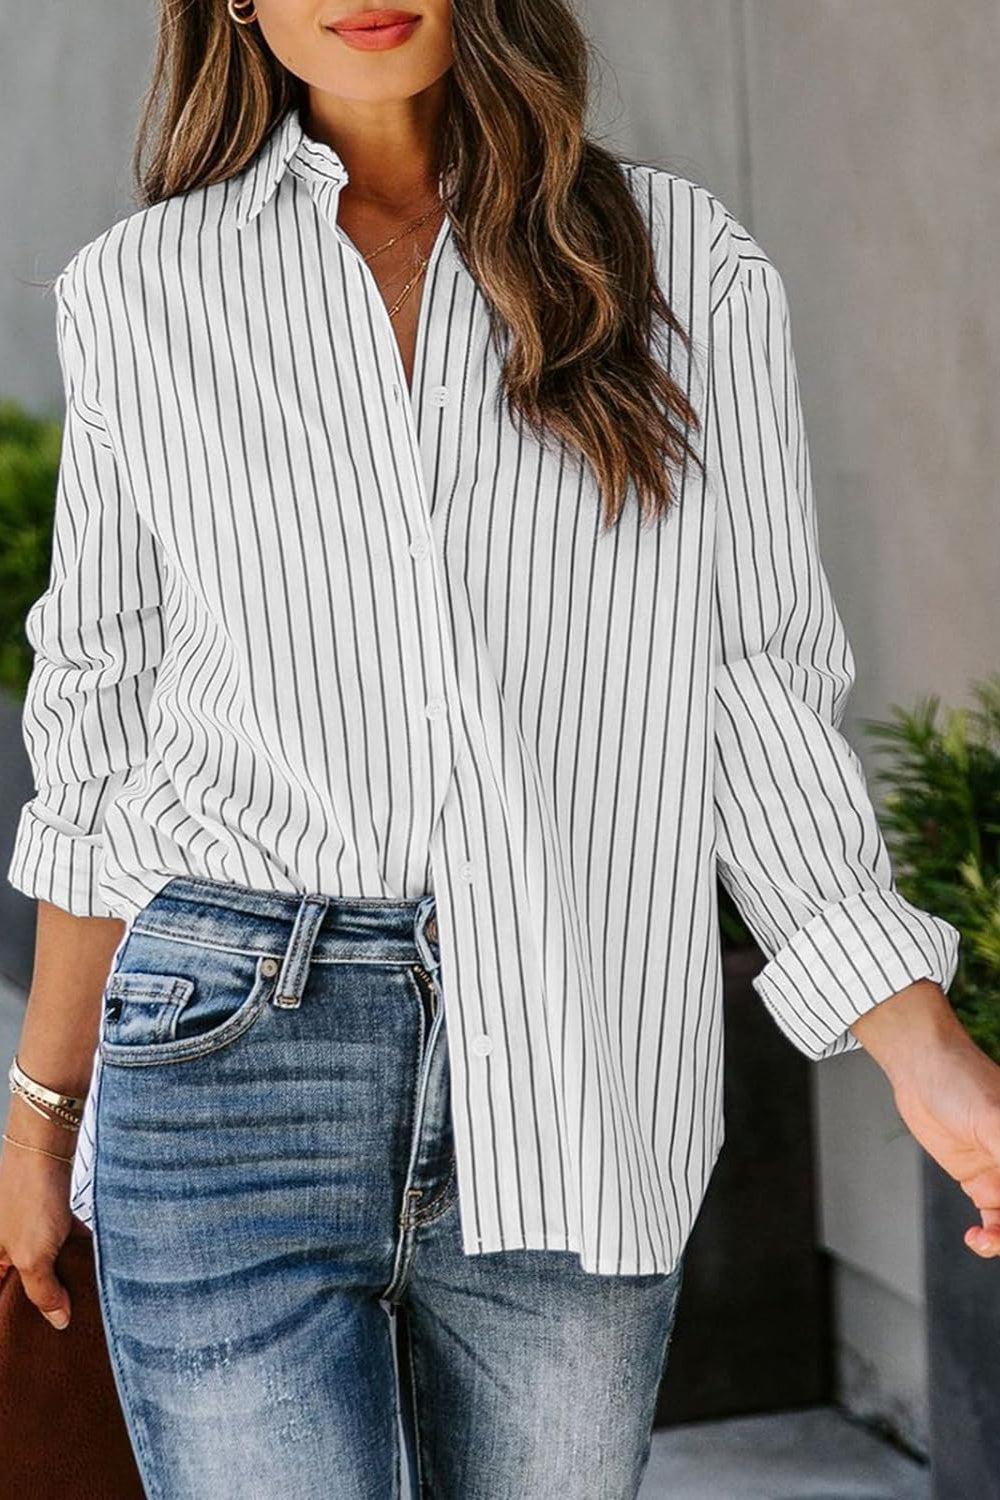 a woman wearing a white and black striped shirt